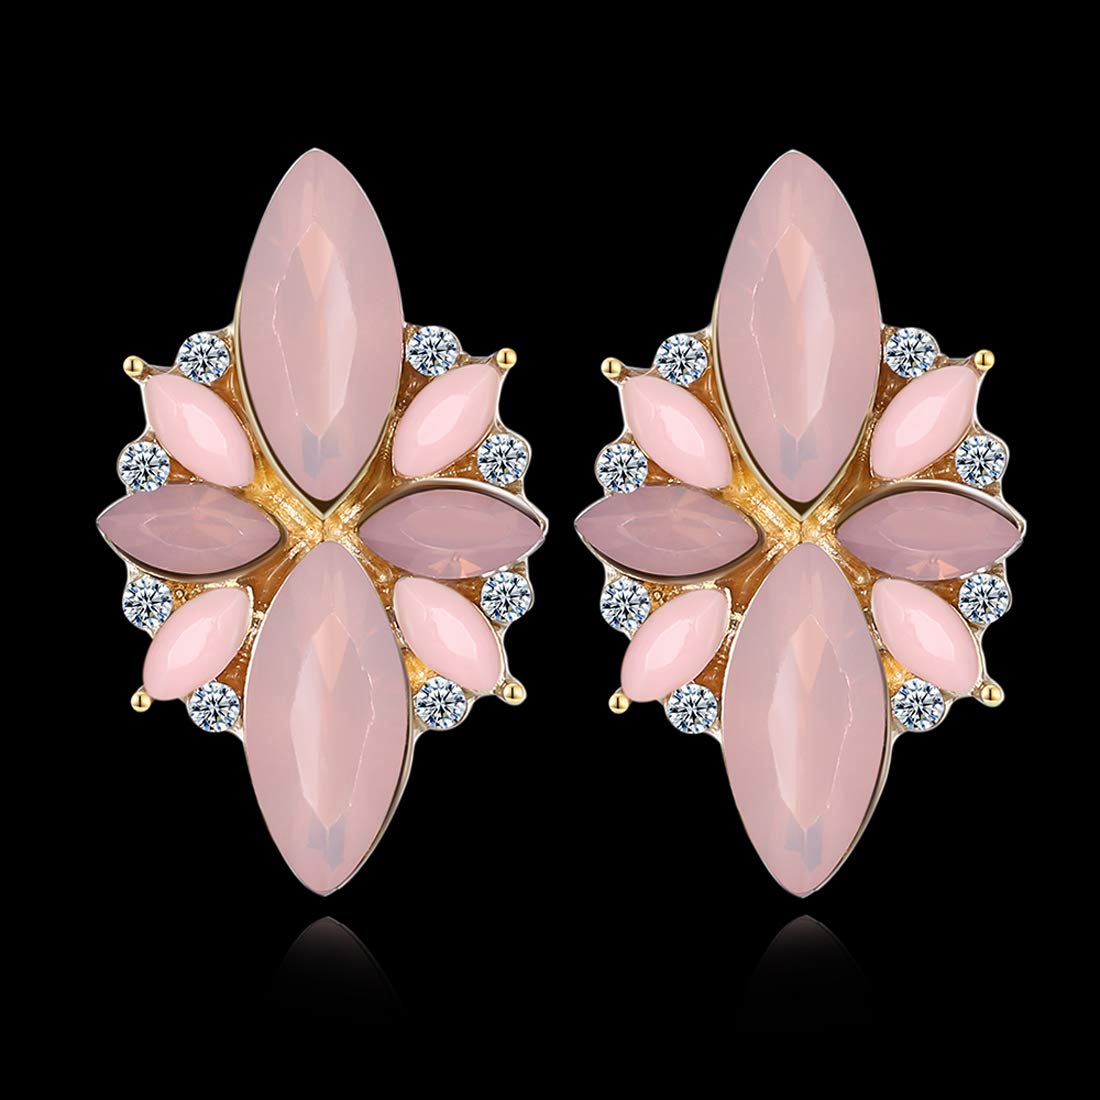 Yellow Chimes Crystal Studded Gold Plated Floral Stud Earrings for Women and Girls